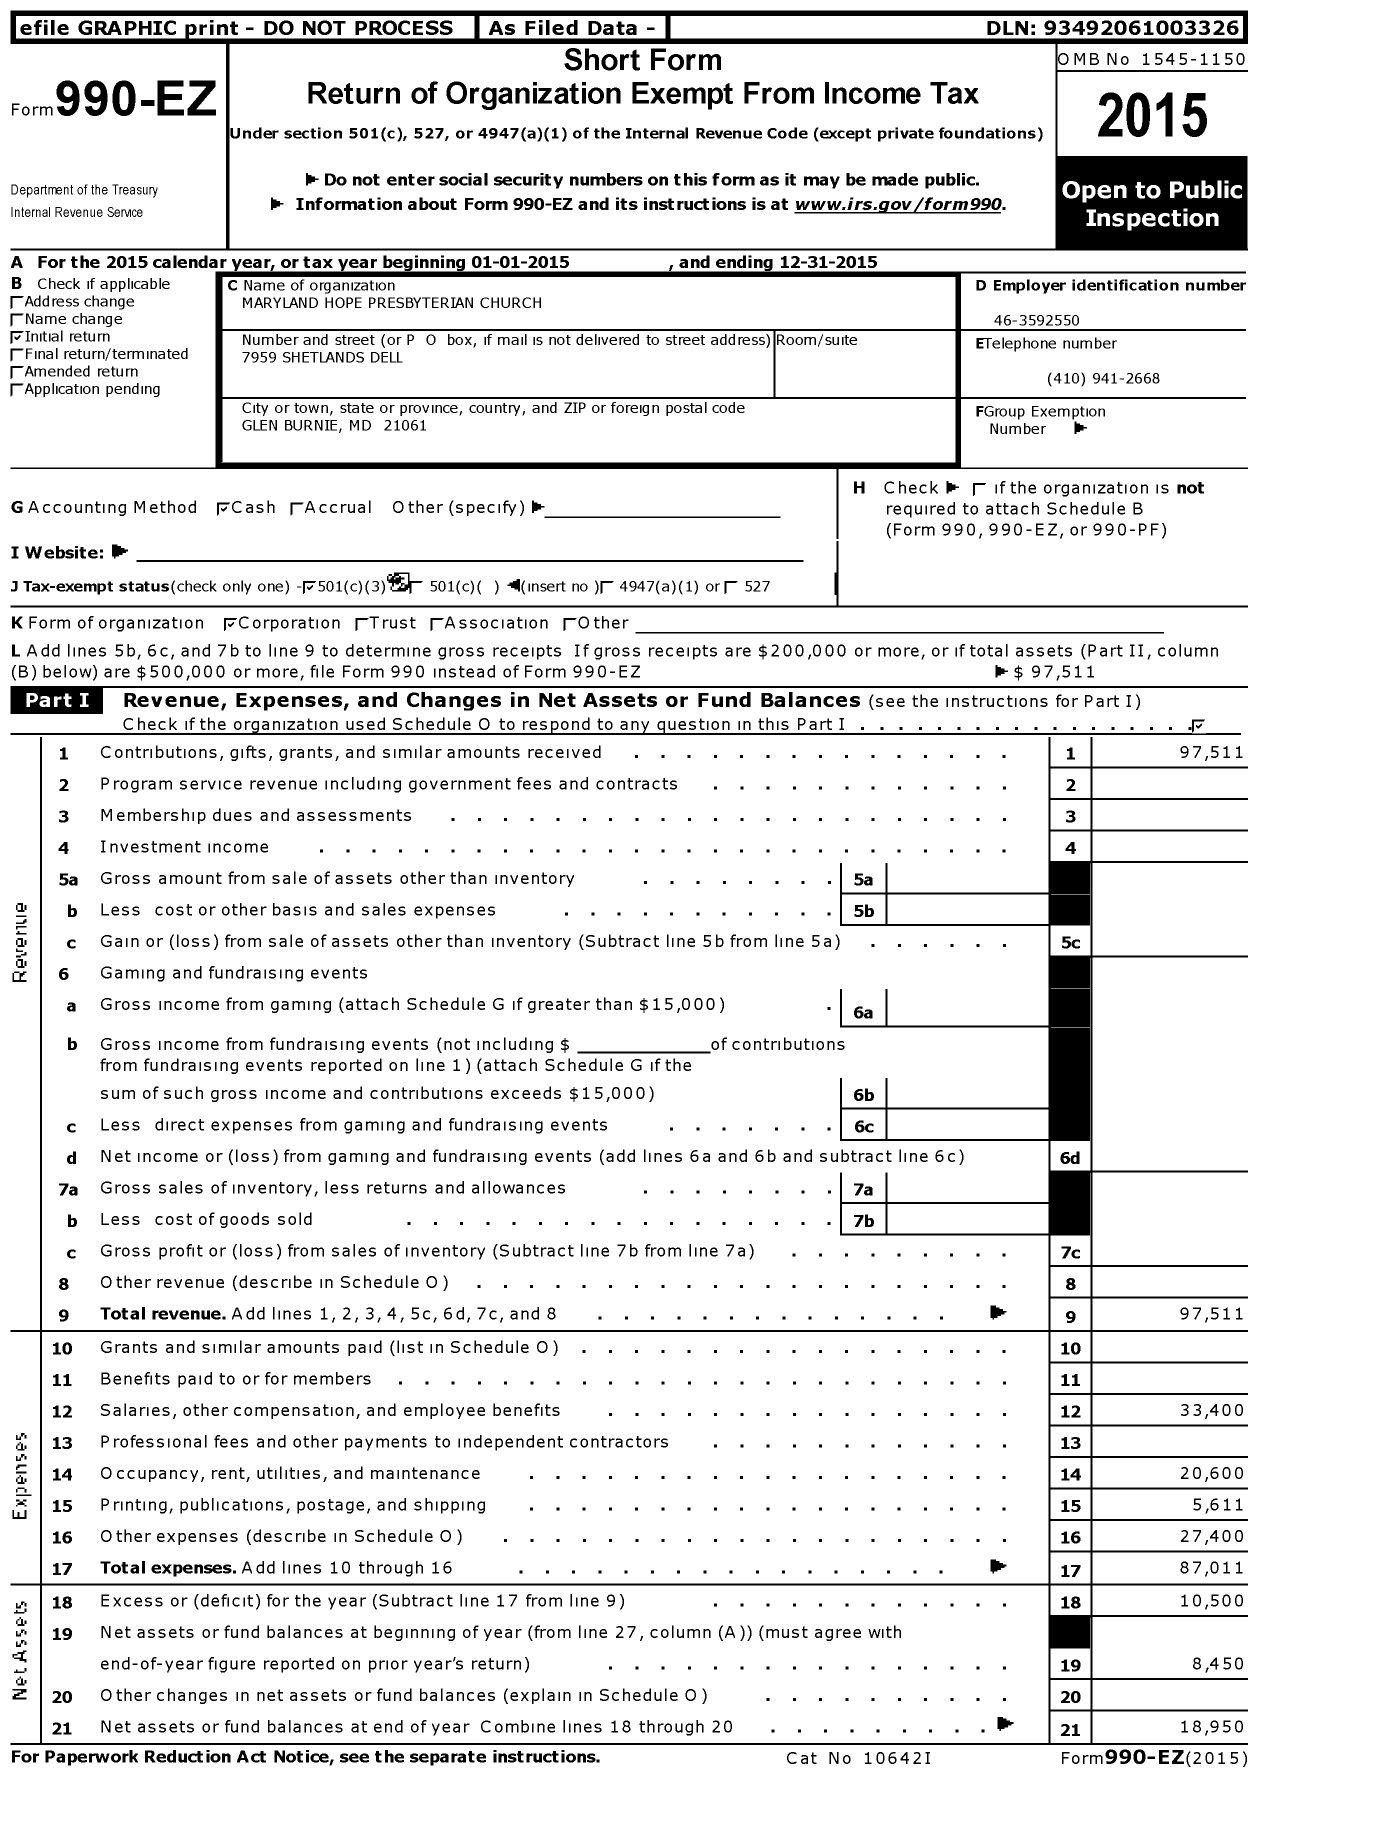 Image of first page of 2015 Form 990EZ for Maryland Hope Presbyterian Church